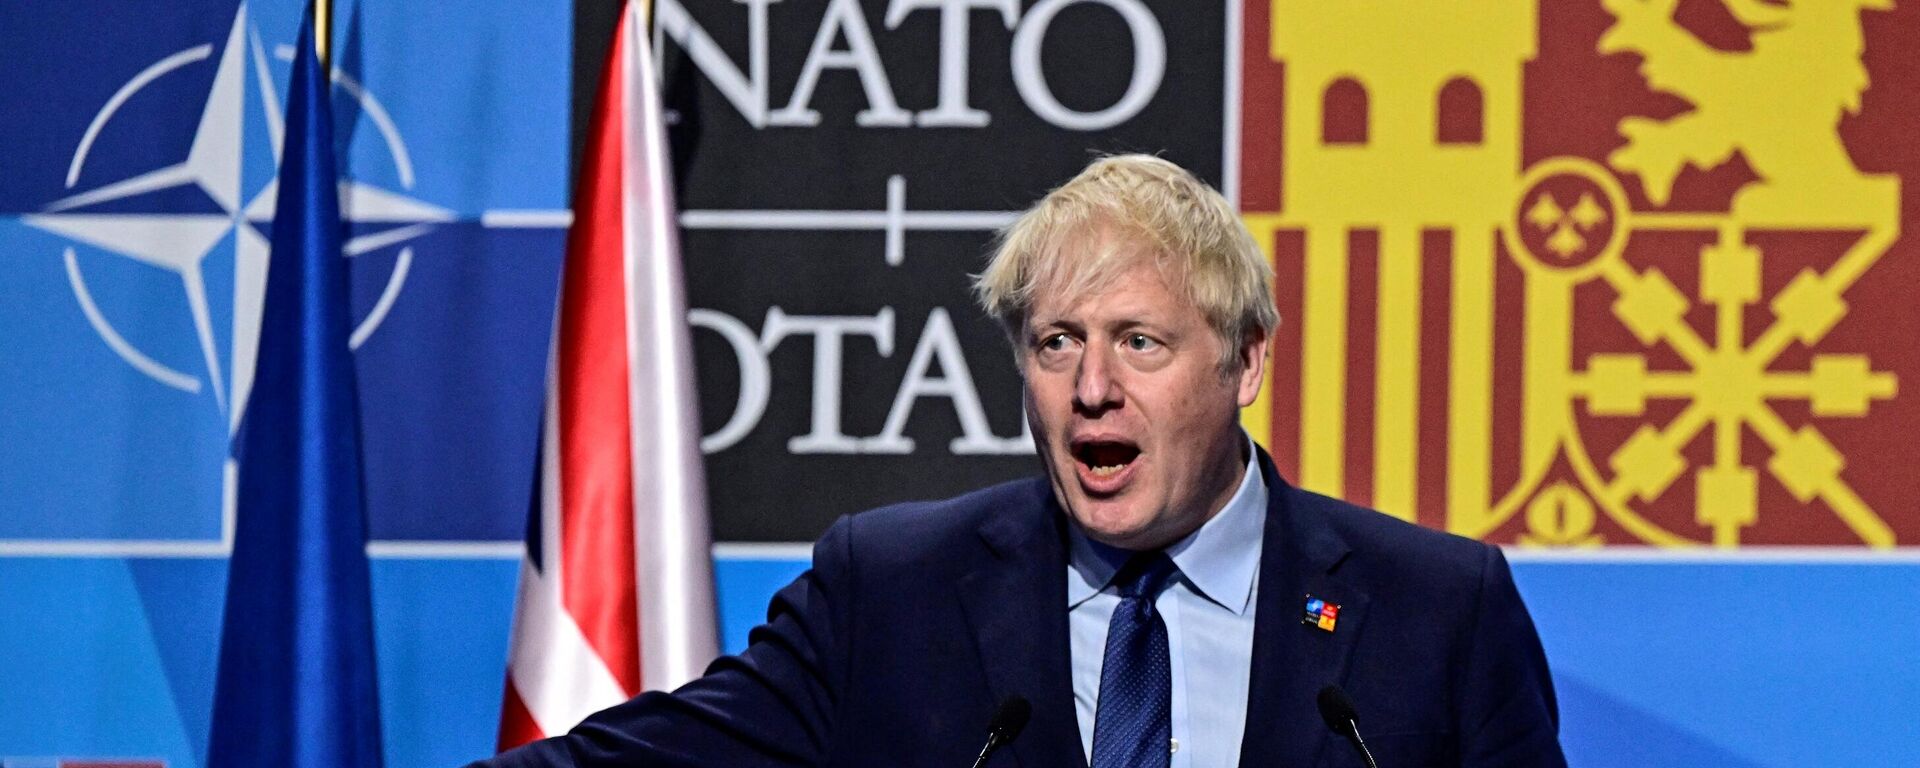 Britain's Prime Minister Boris Johnson gestures as he addresses media representatives during a press conference at the NATO summit at the Ifema congress centre in Madrid, on June 30, 2022. - Sputnik International, 1920, 01.07.2022